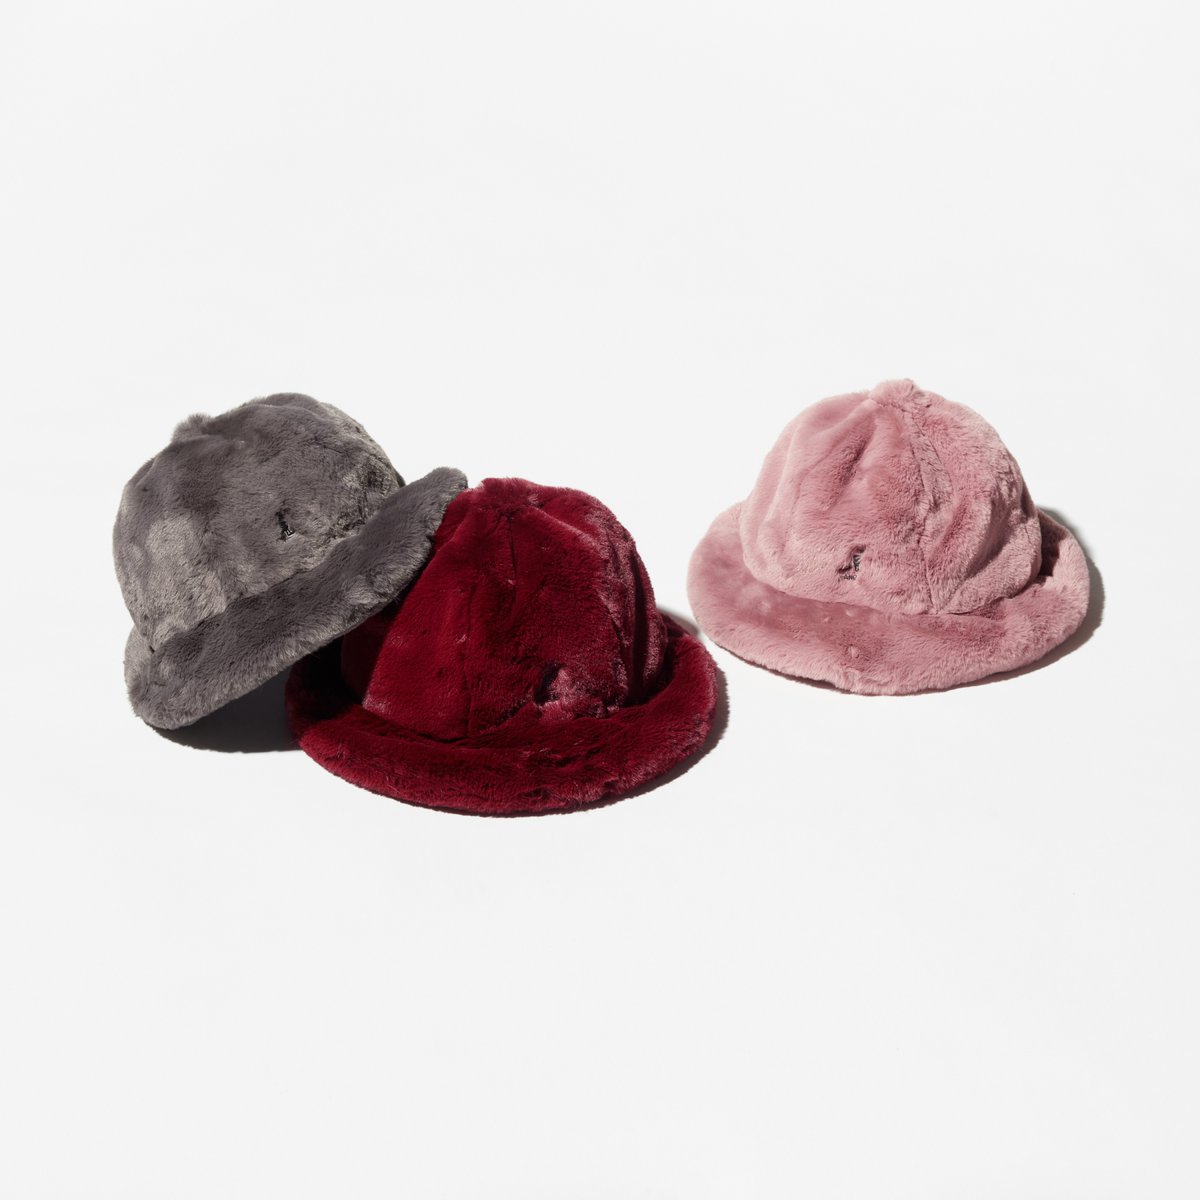 'KANGOL x Fukase - Faux Fur Casual Special Collaboration”